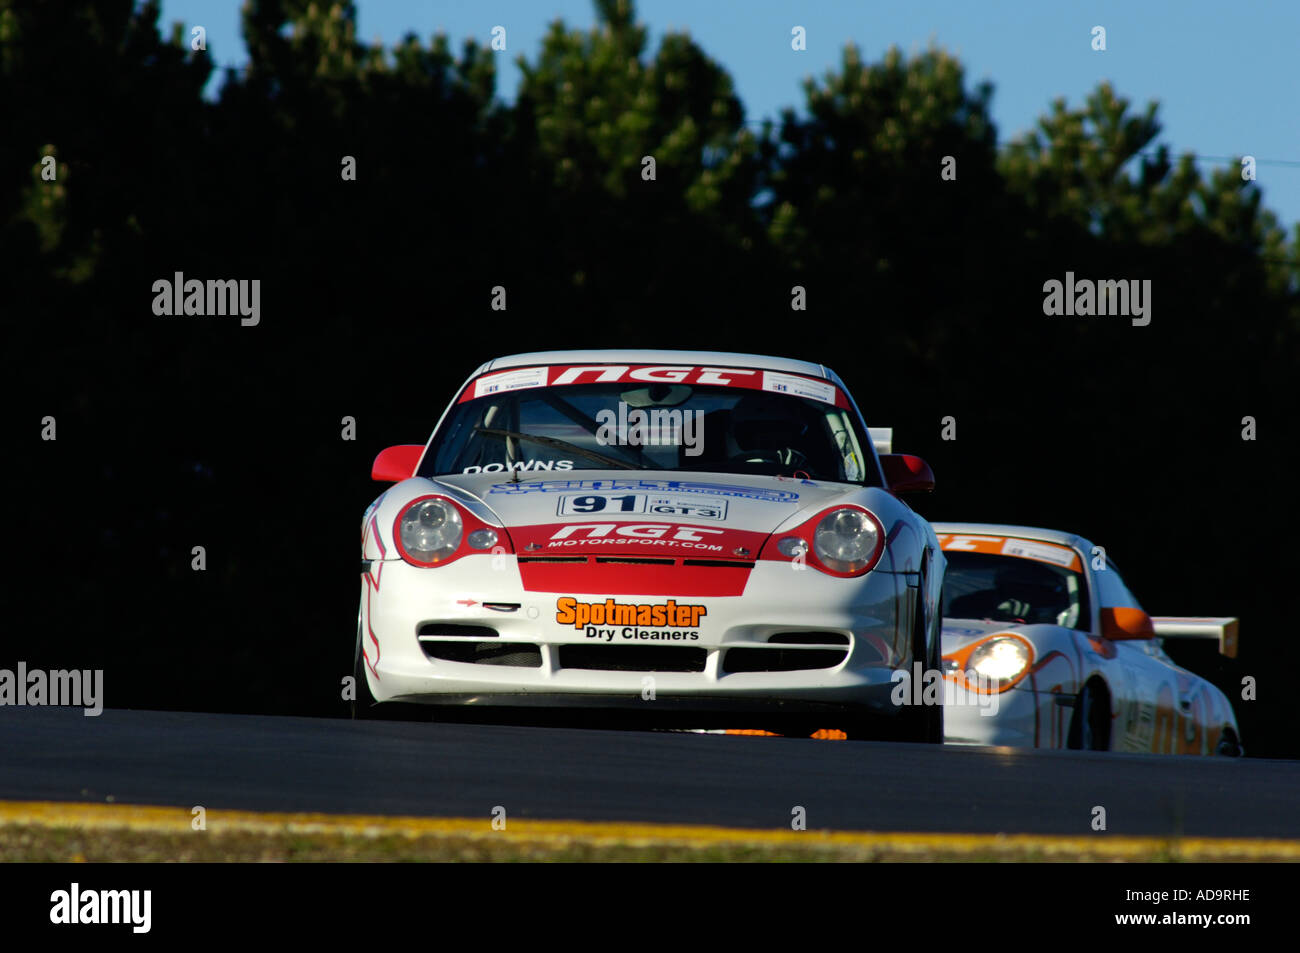 Joe Downs Porsche 911 GT3 car is followed by team mate Ramez Wahab at the GT3 in the IMSA GT Cup Challenge at Mid-Ohio 2006 Stock Photo